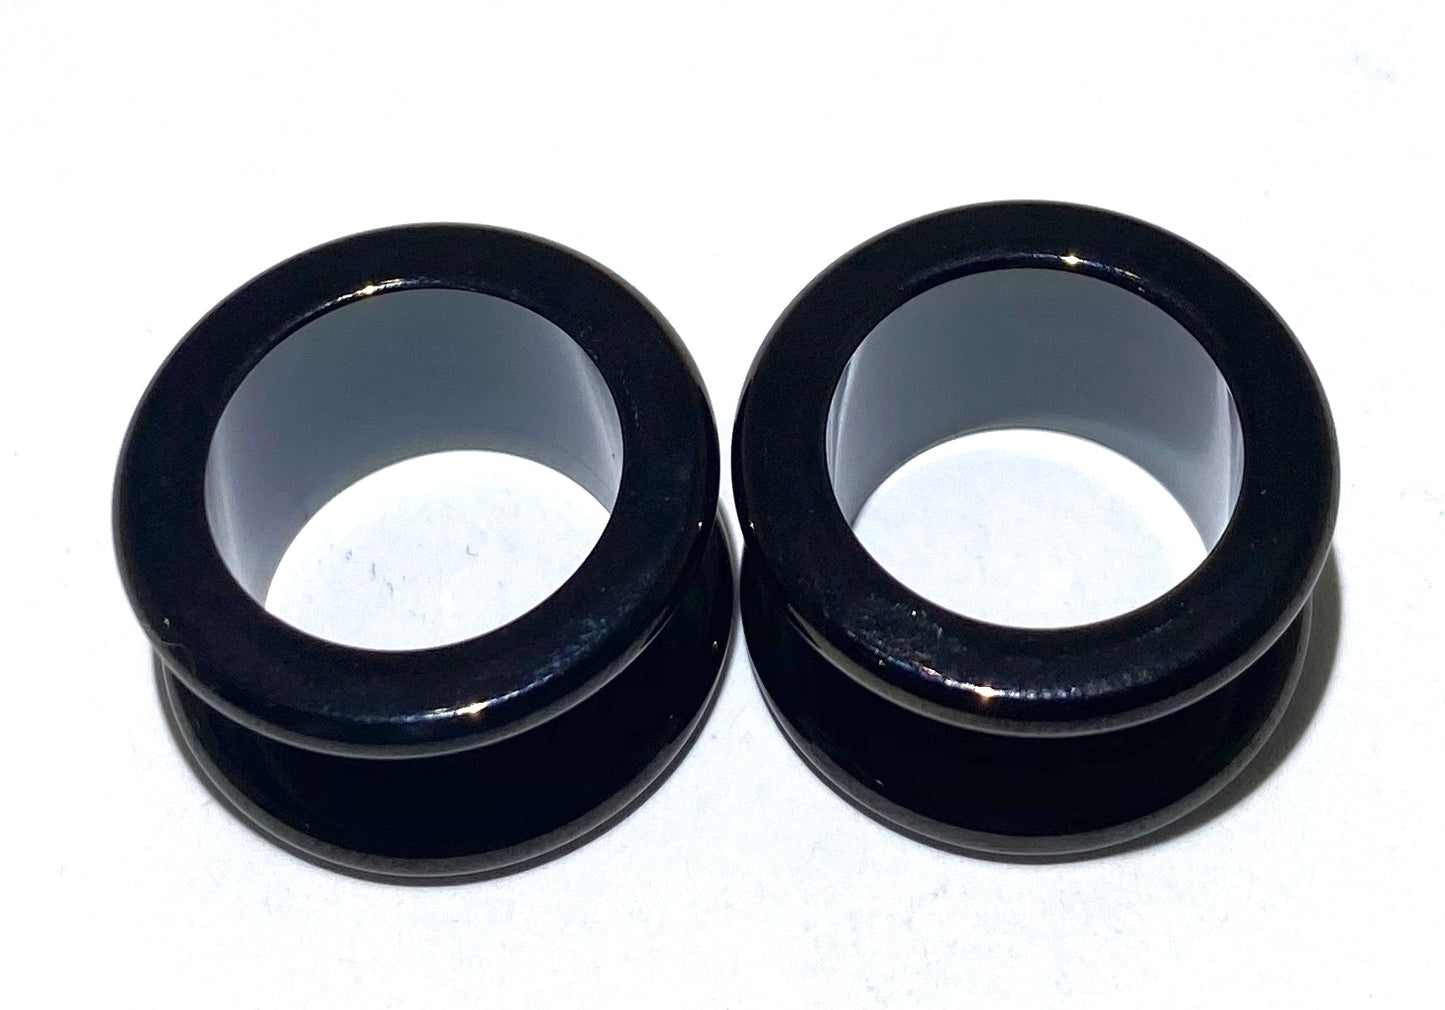 Gloss Black PVD Tunnel with Rounded Edges (Threaded)